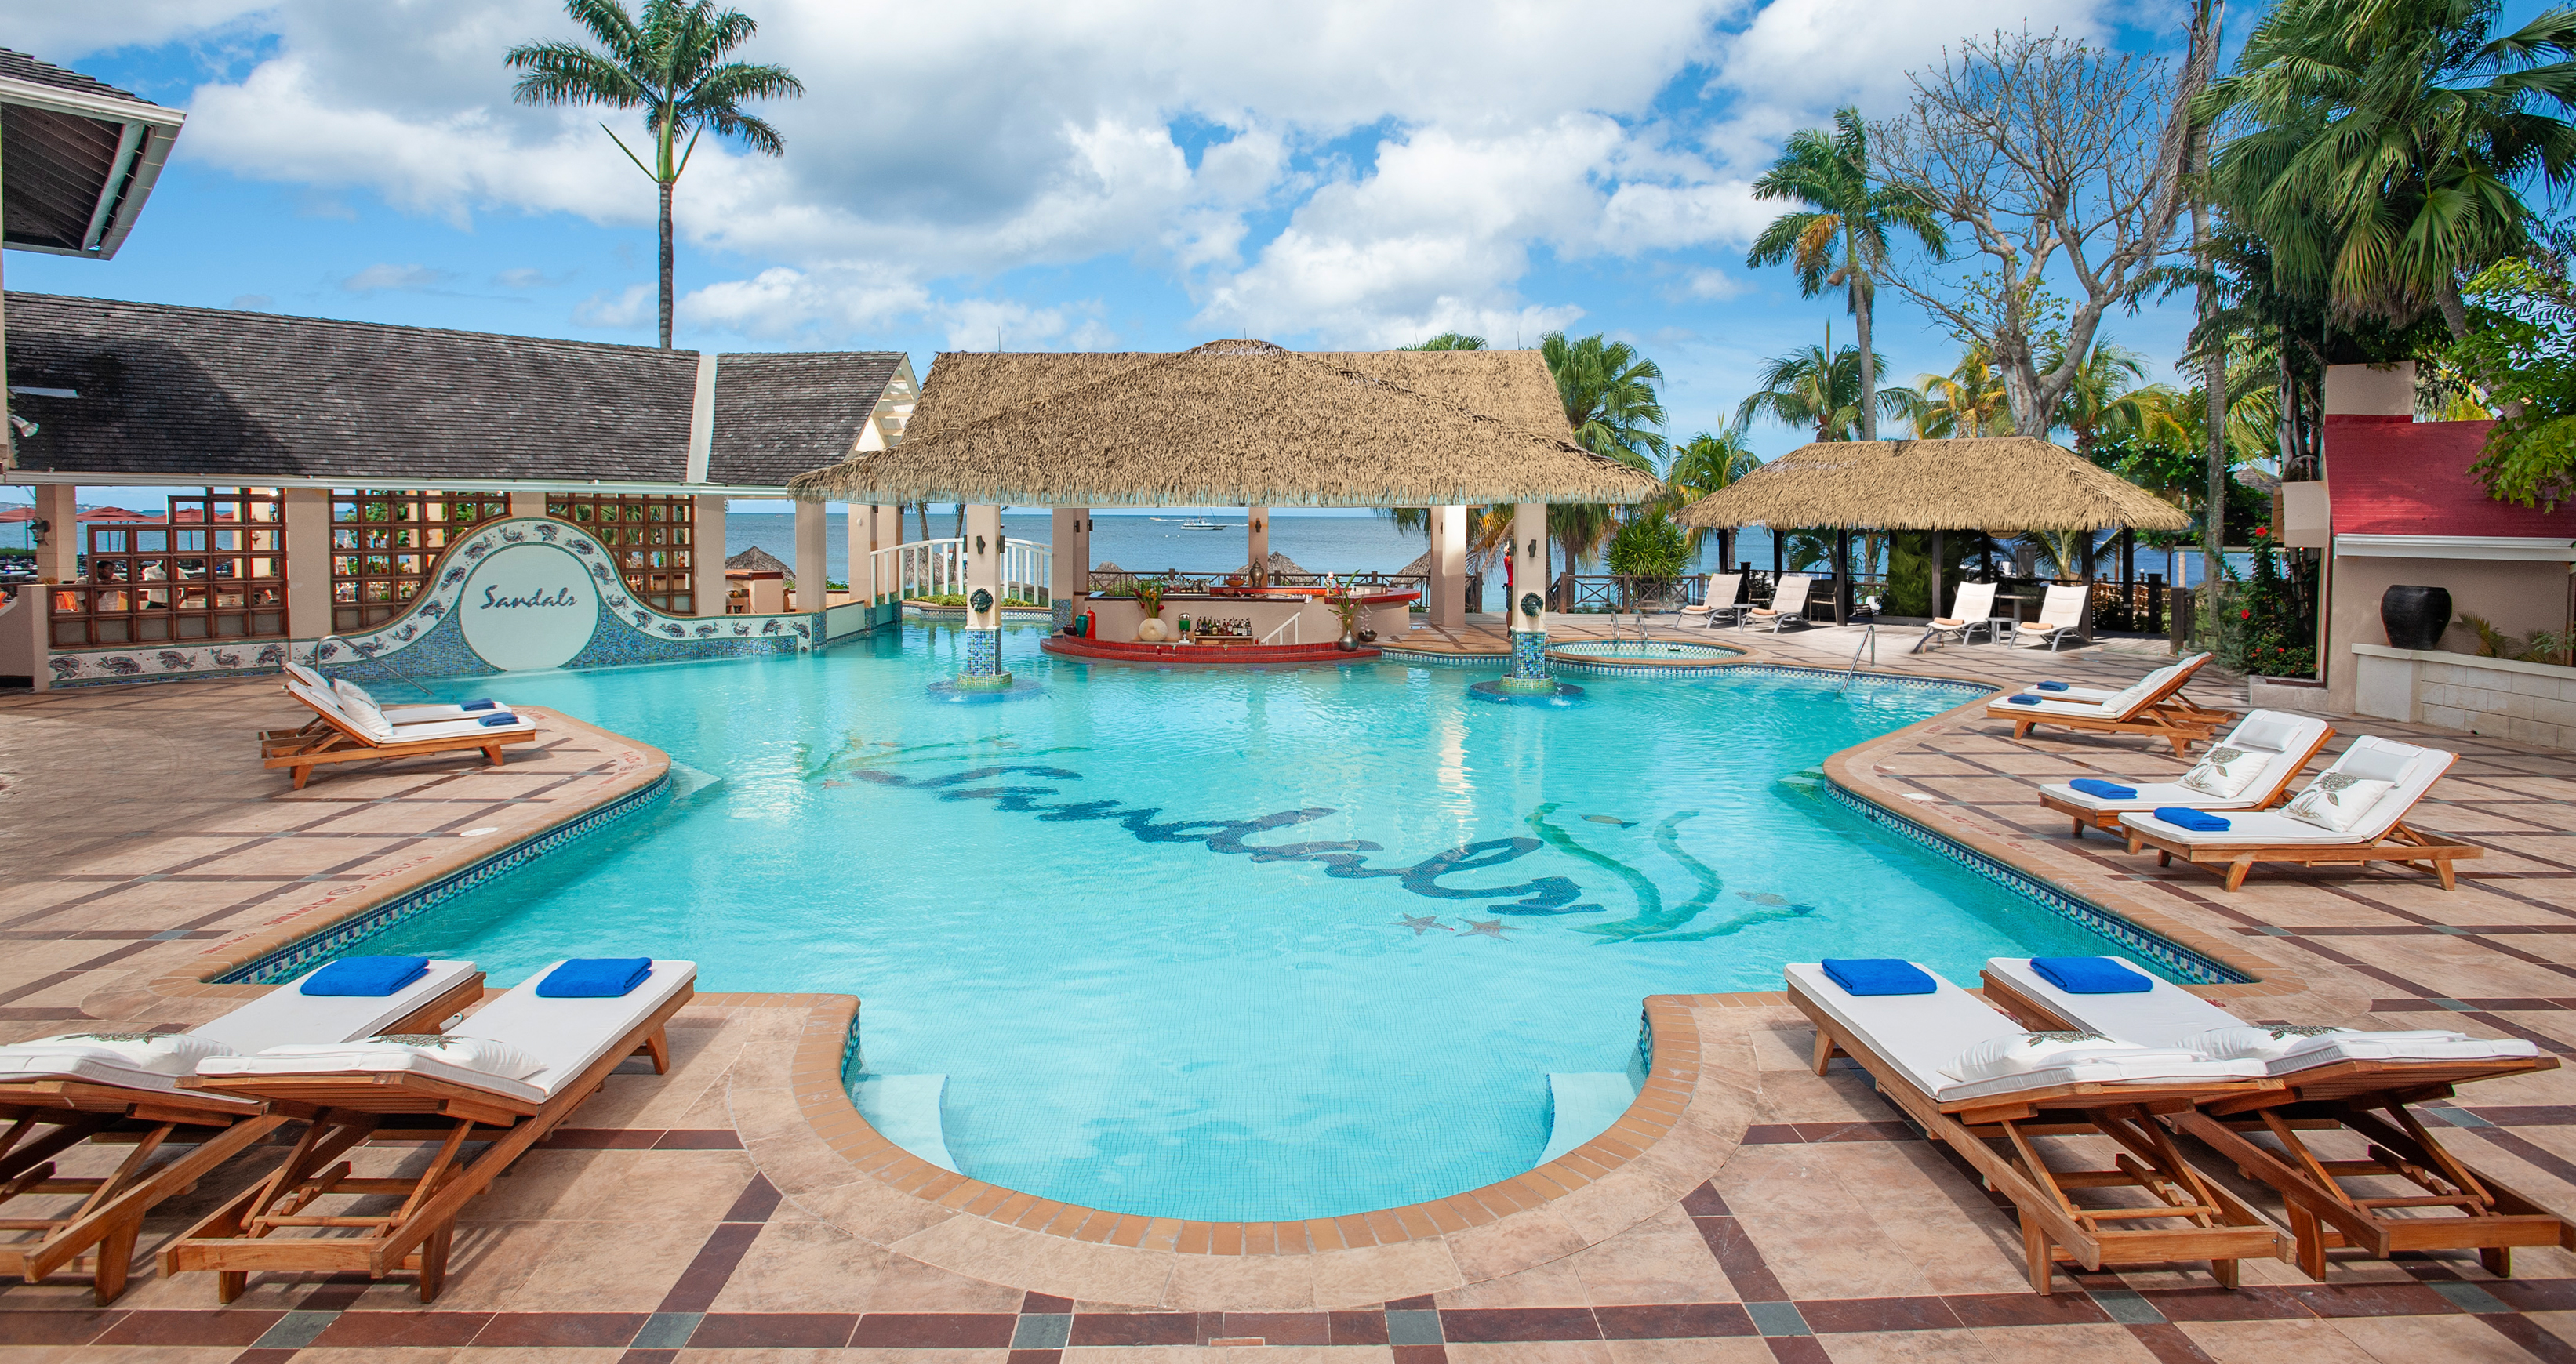 View the Resort Map of Sandals® Royal Plantation